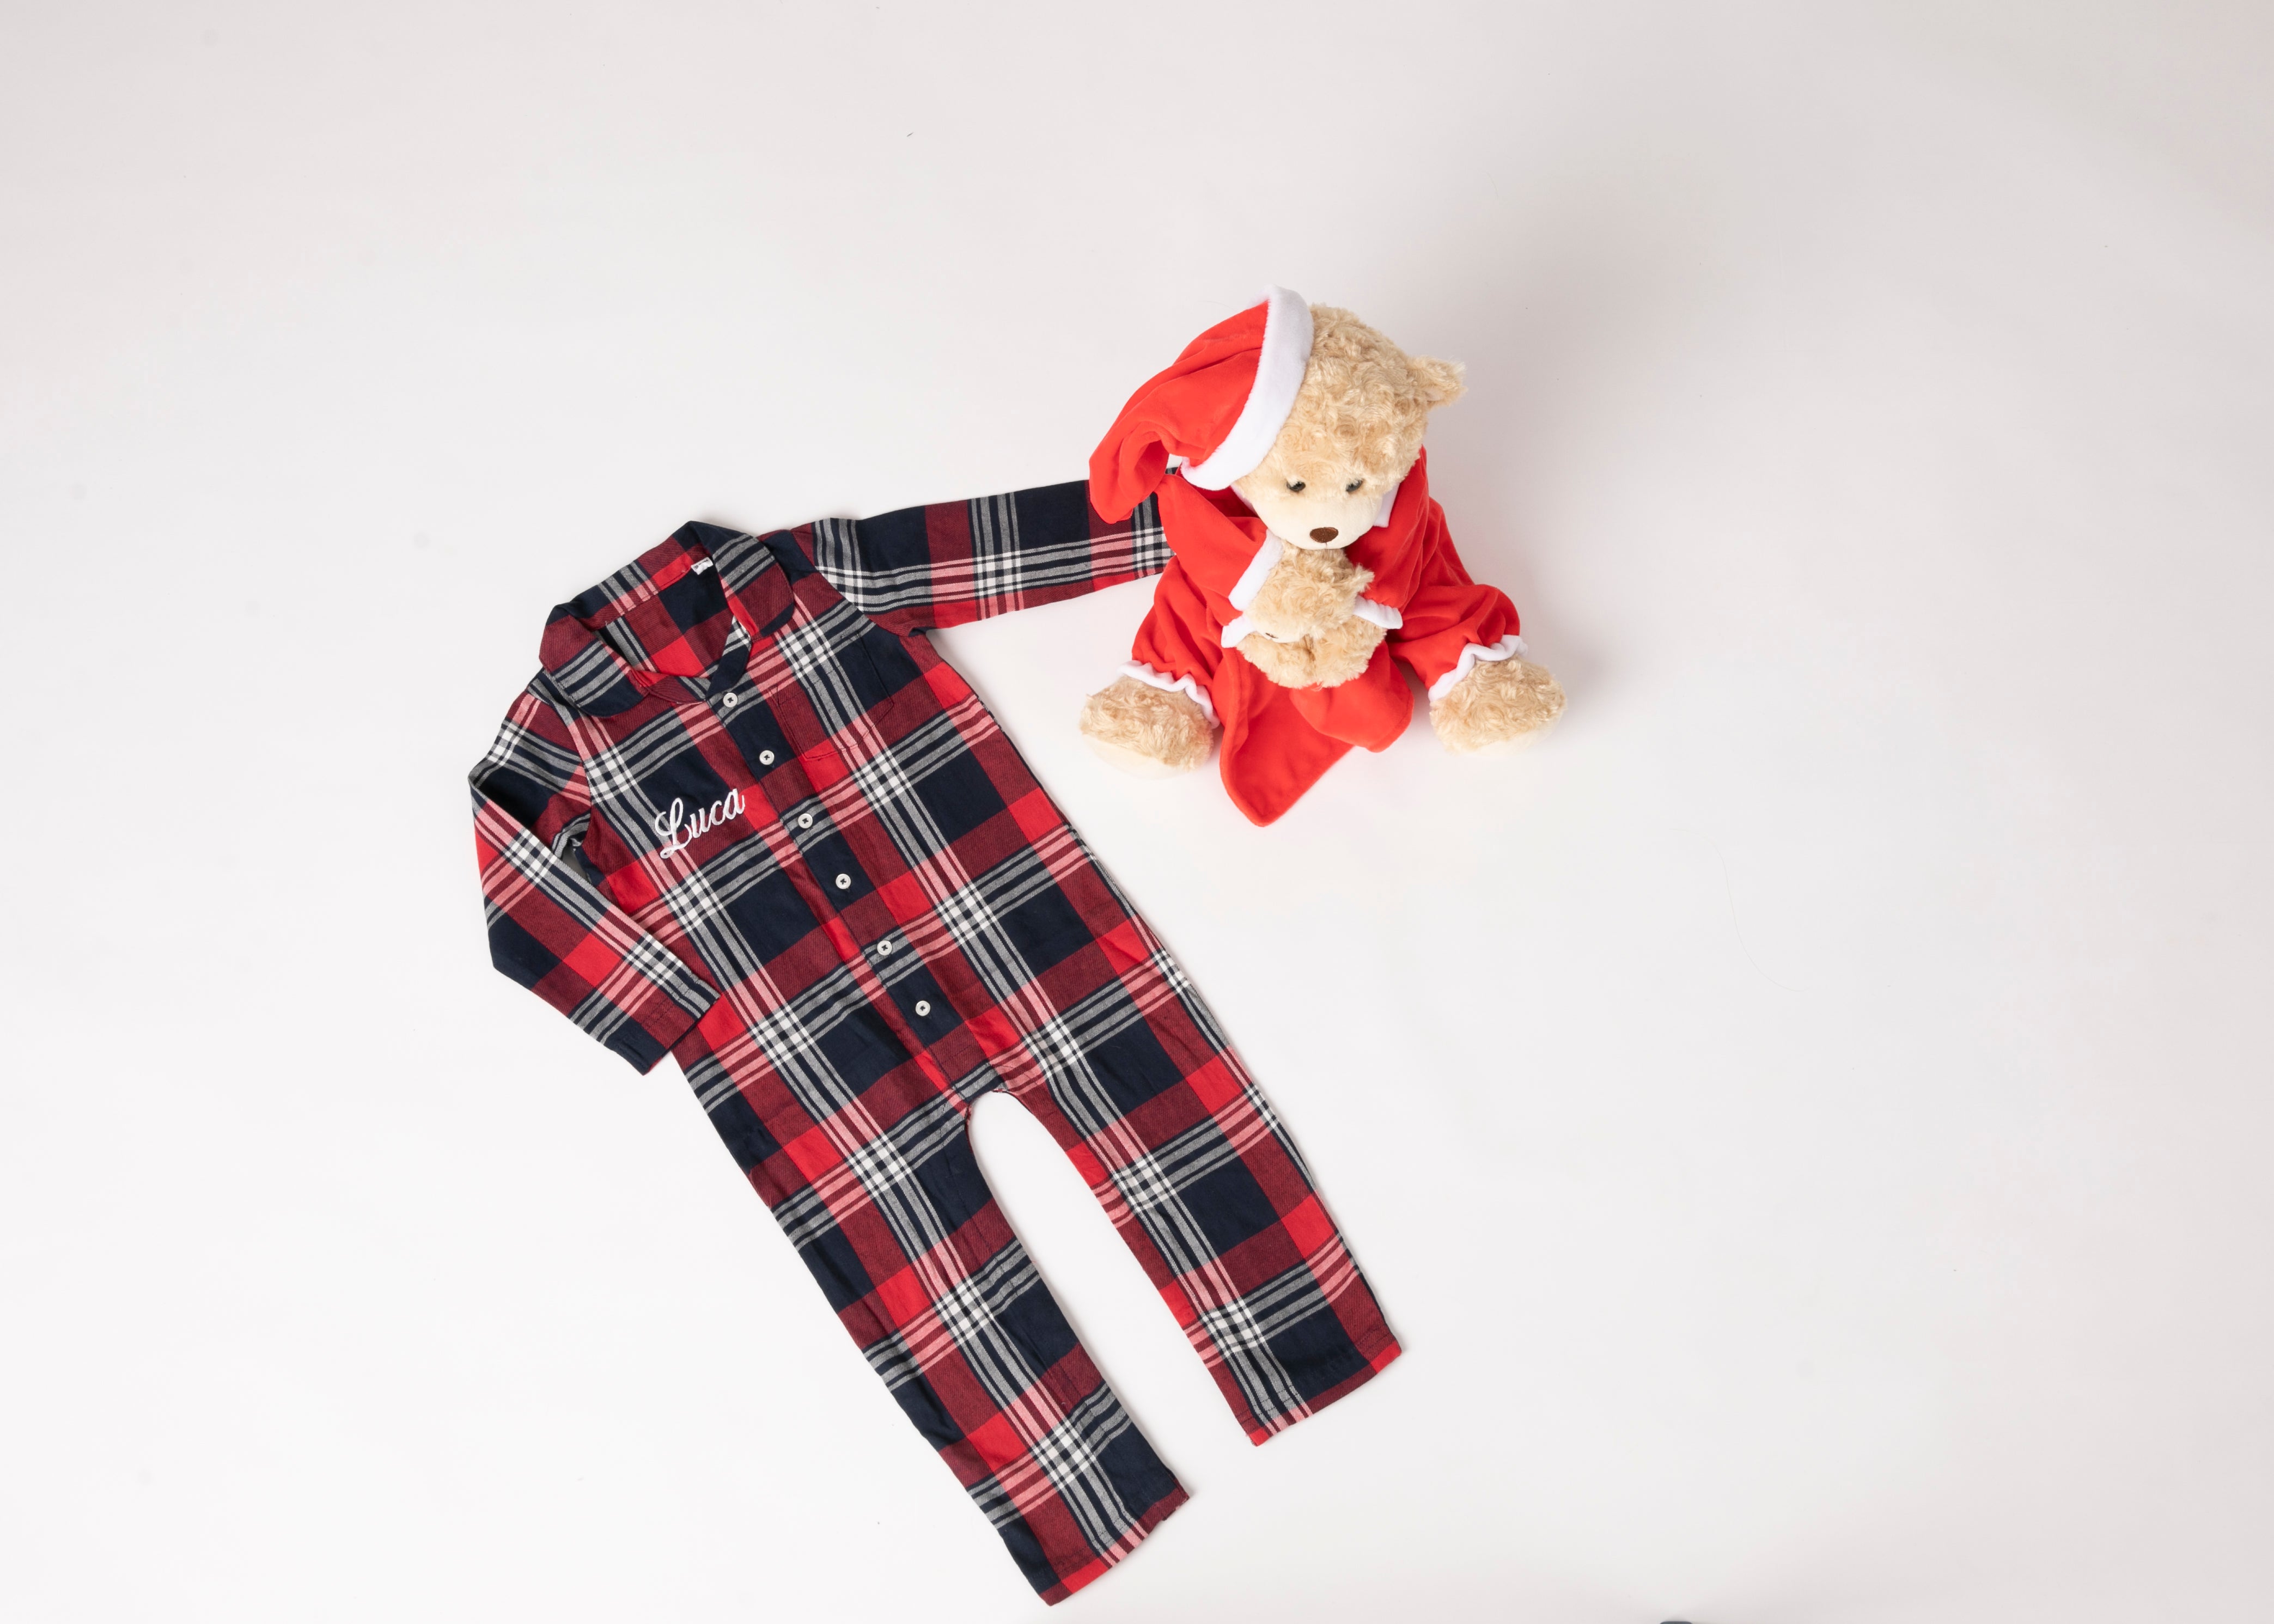 Christmas All in one suit - & Santa bear with embroidered comfortor